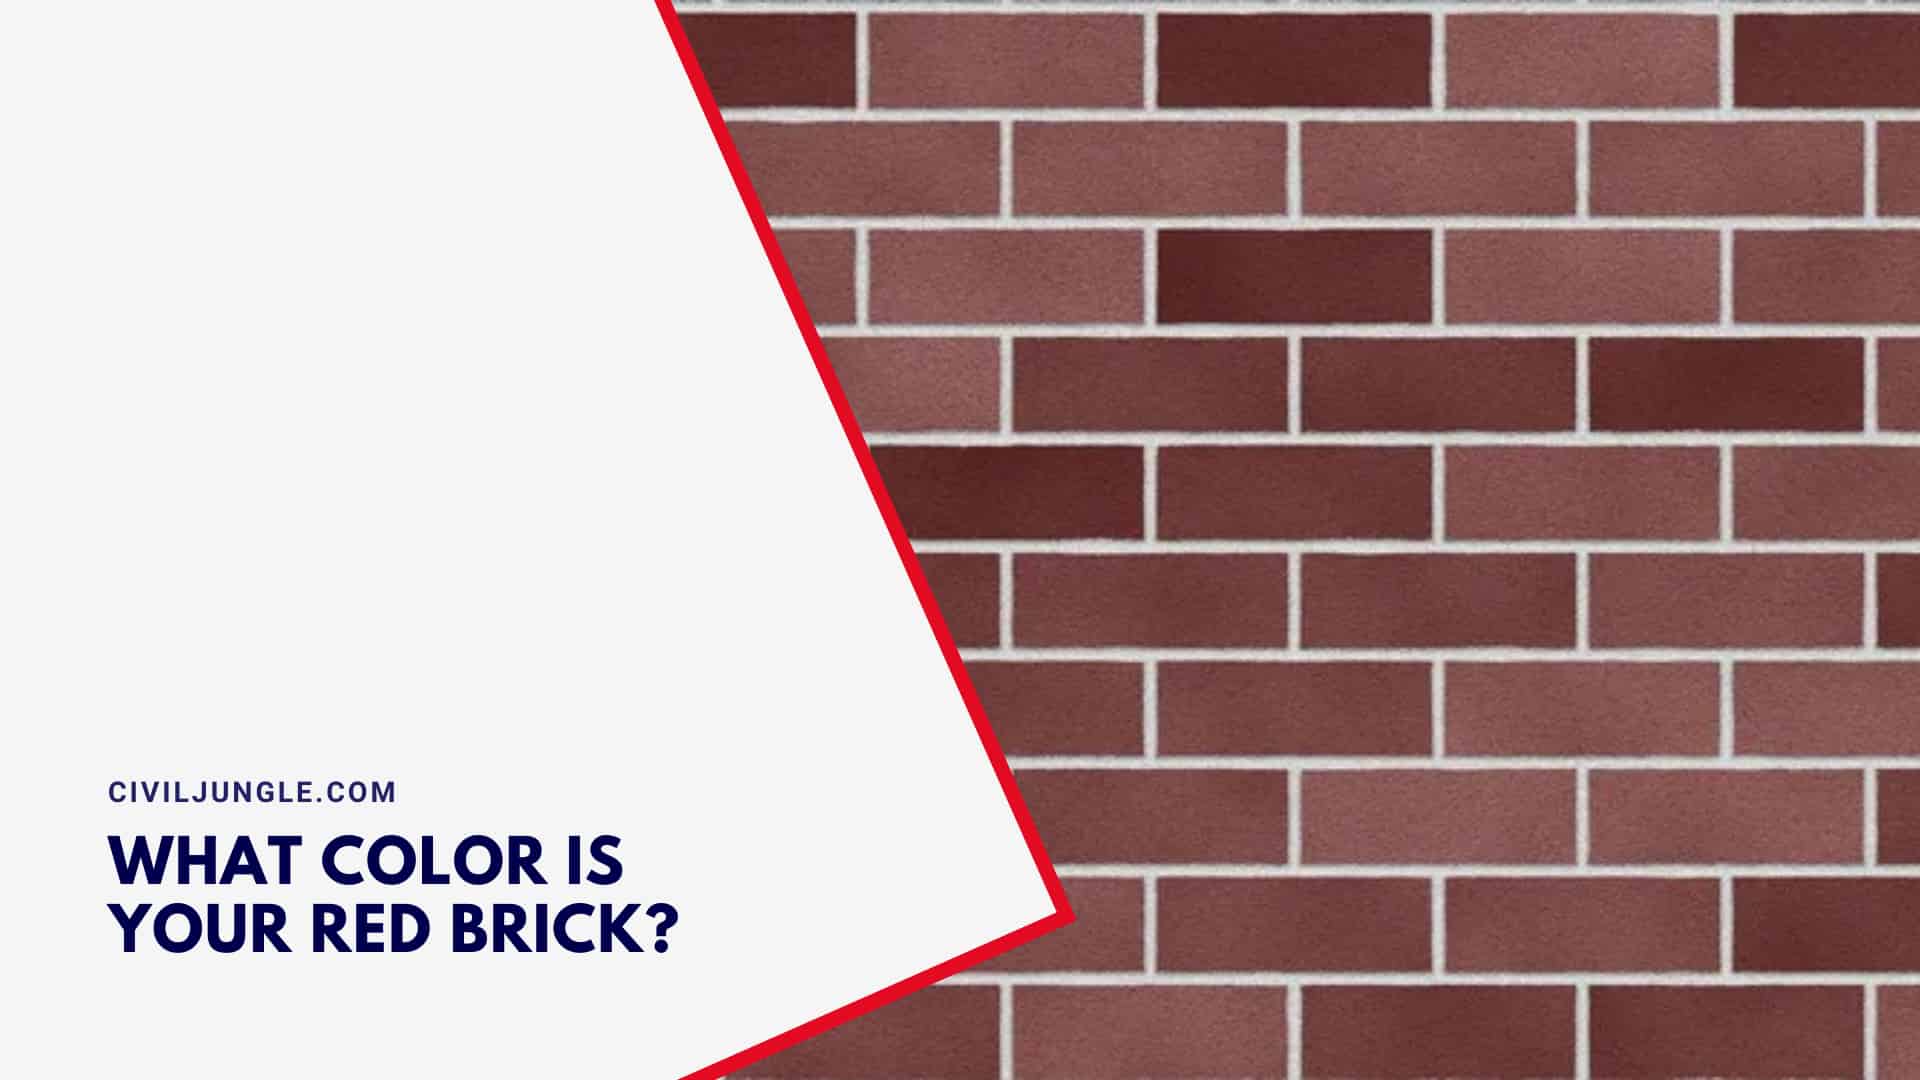 What Color Is Your Red Brick?